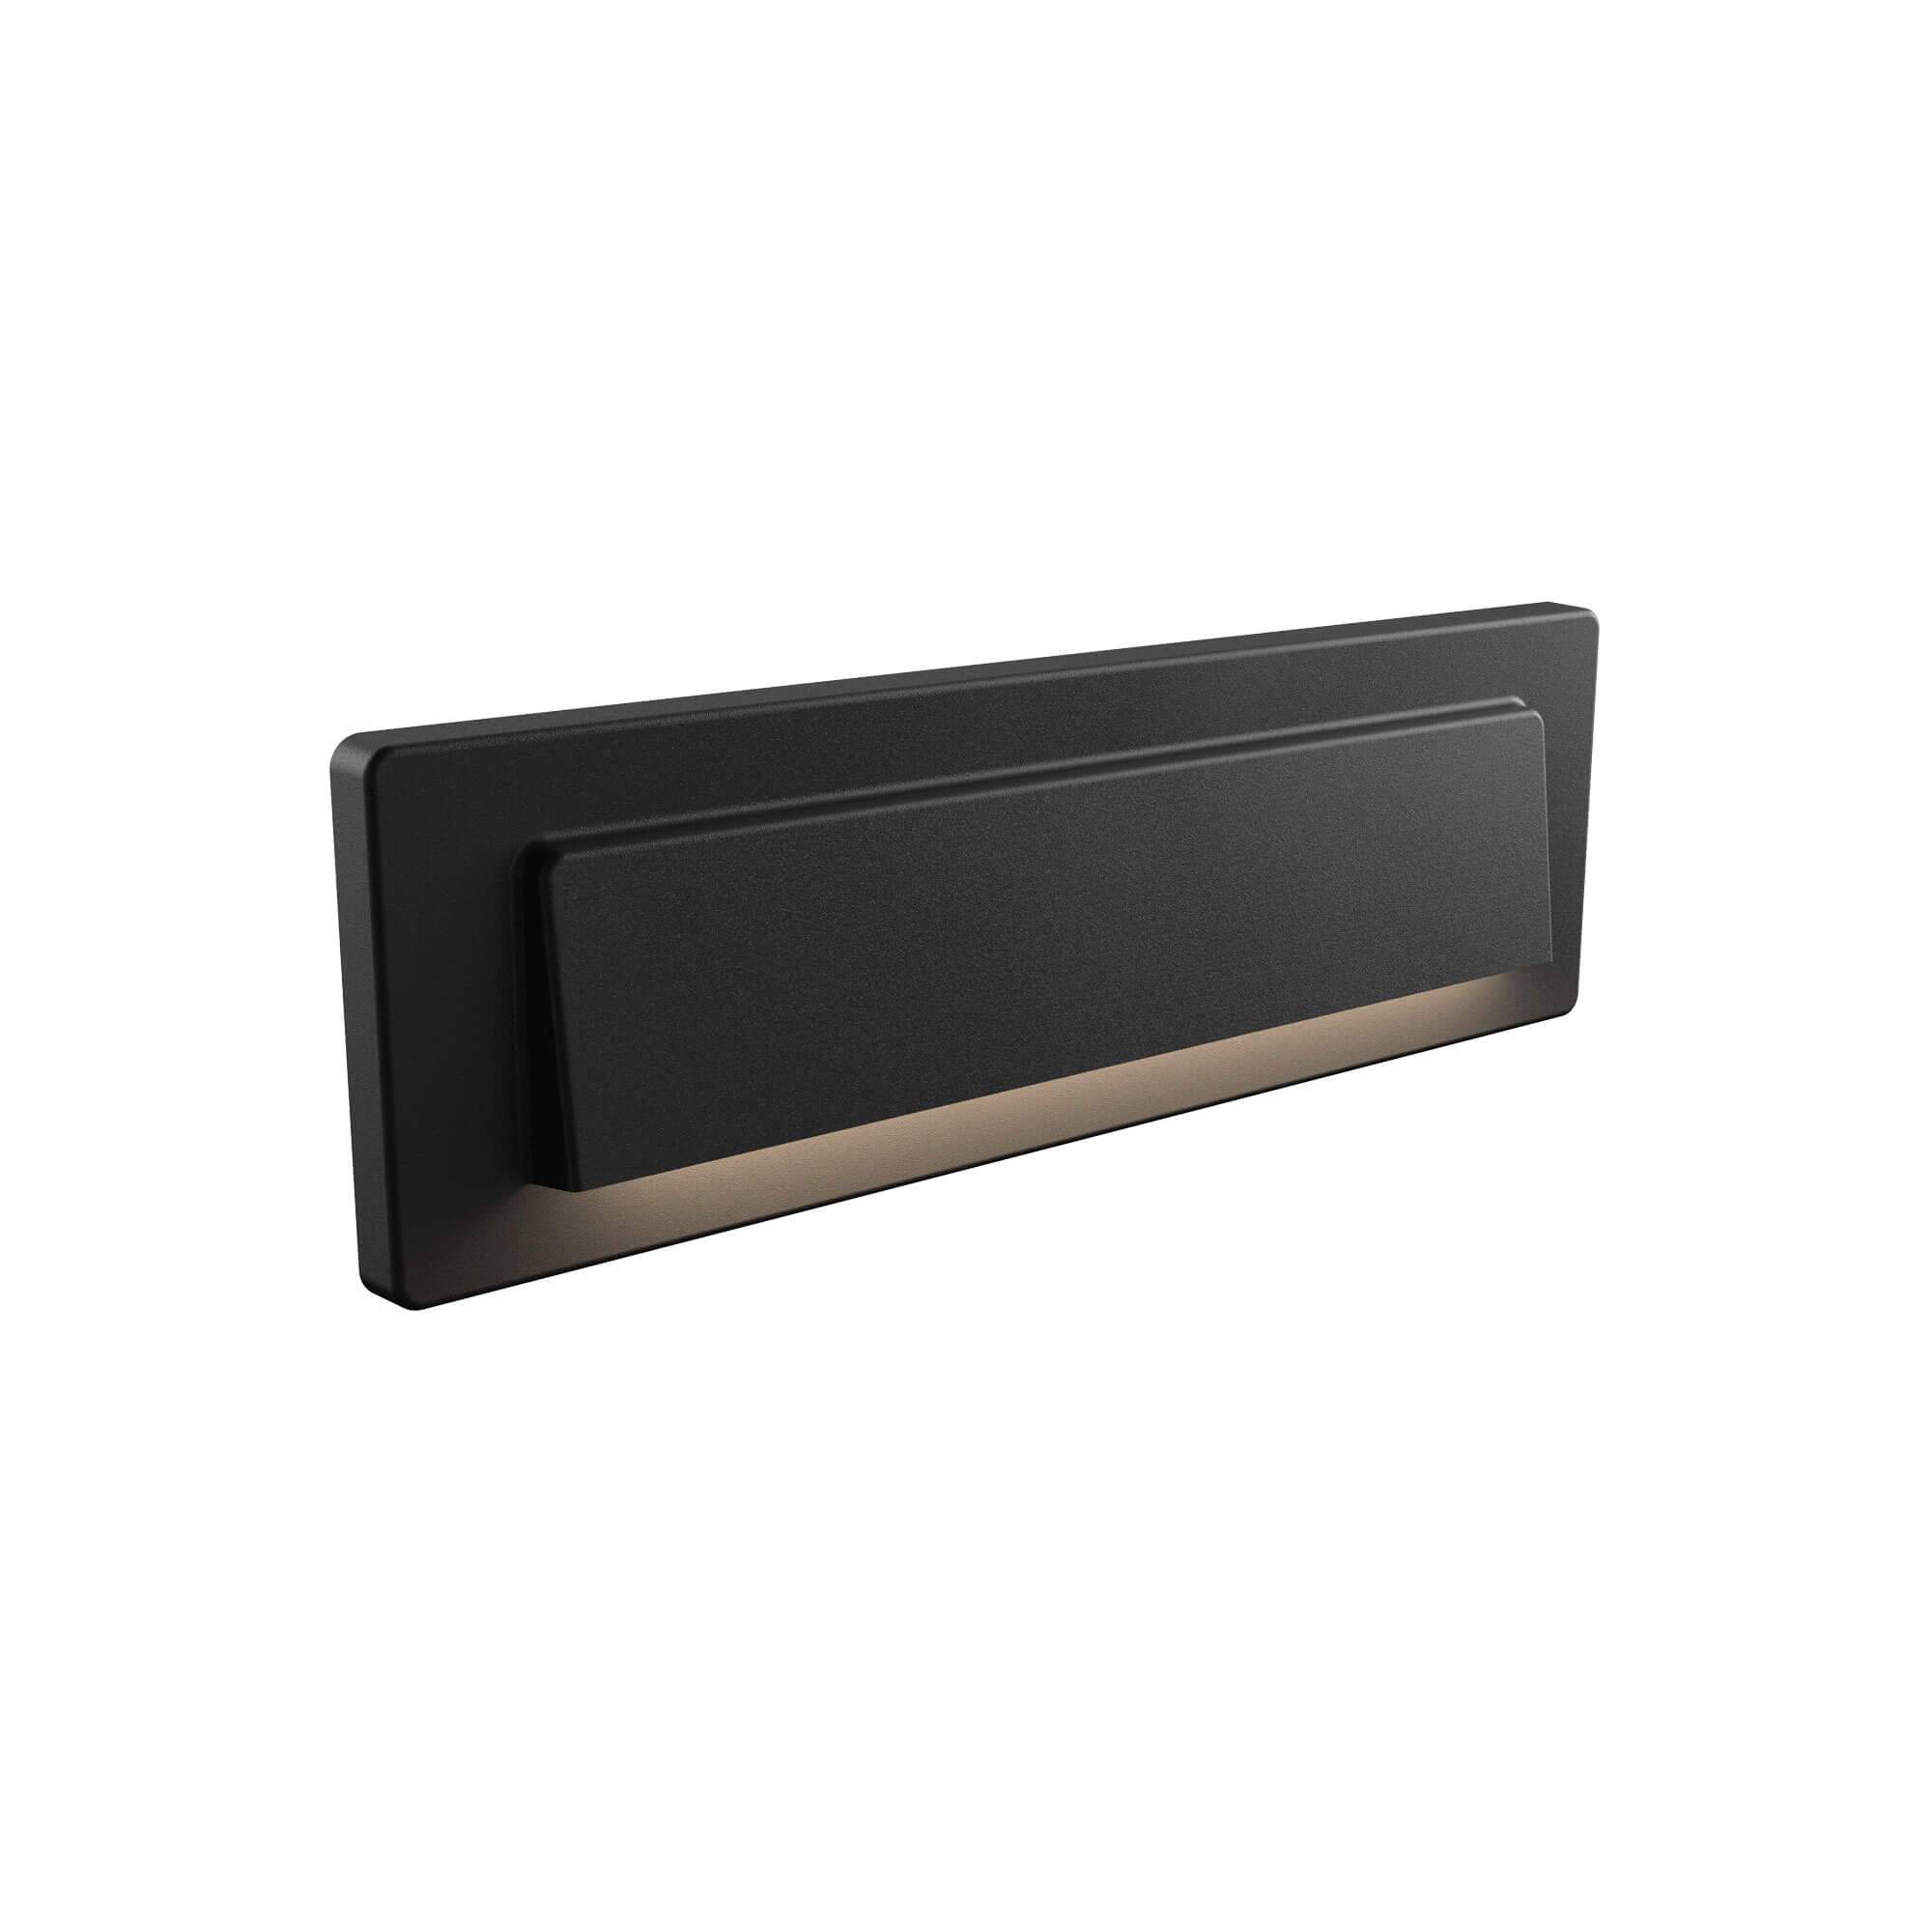 MASON Wall sconce Black INTEGRATED LED - DCP-BRK12-BK | DALS